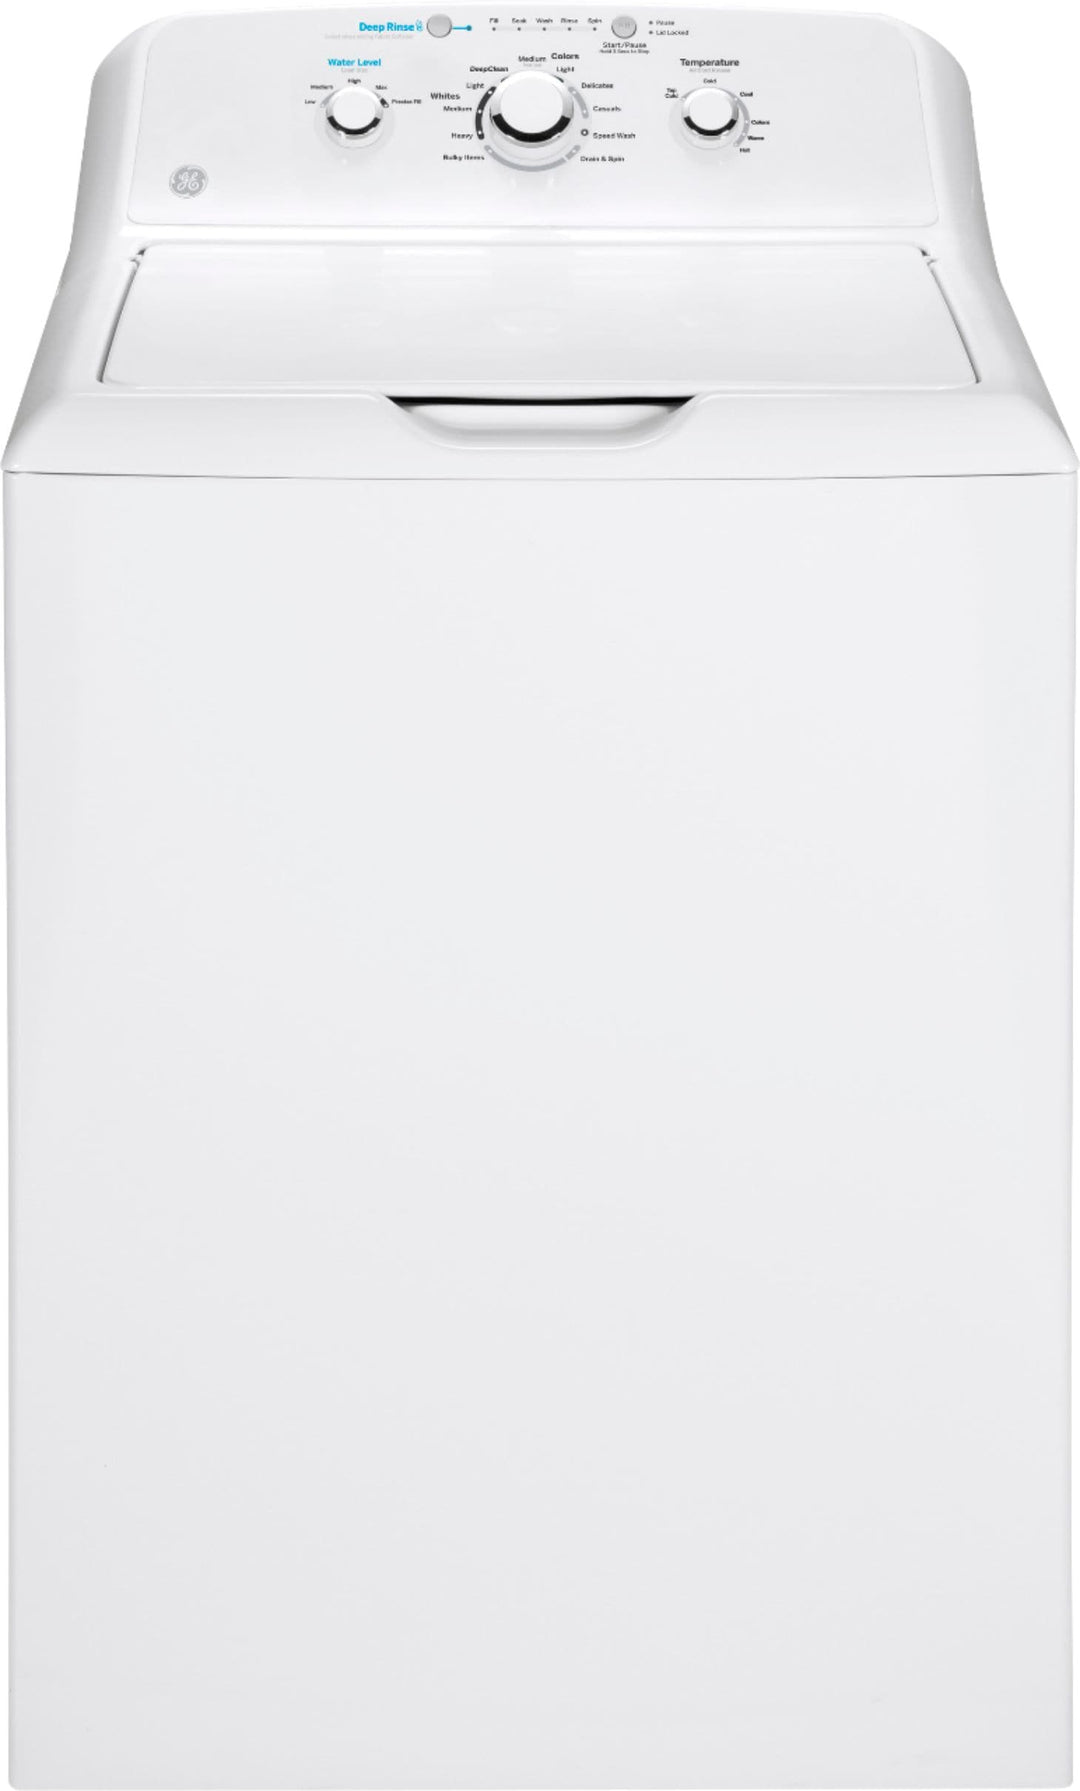 GE - 4.2 Cu. Ft. Top Load Washer with Precise Fill & Deep Rinse - White on white_0